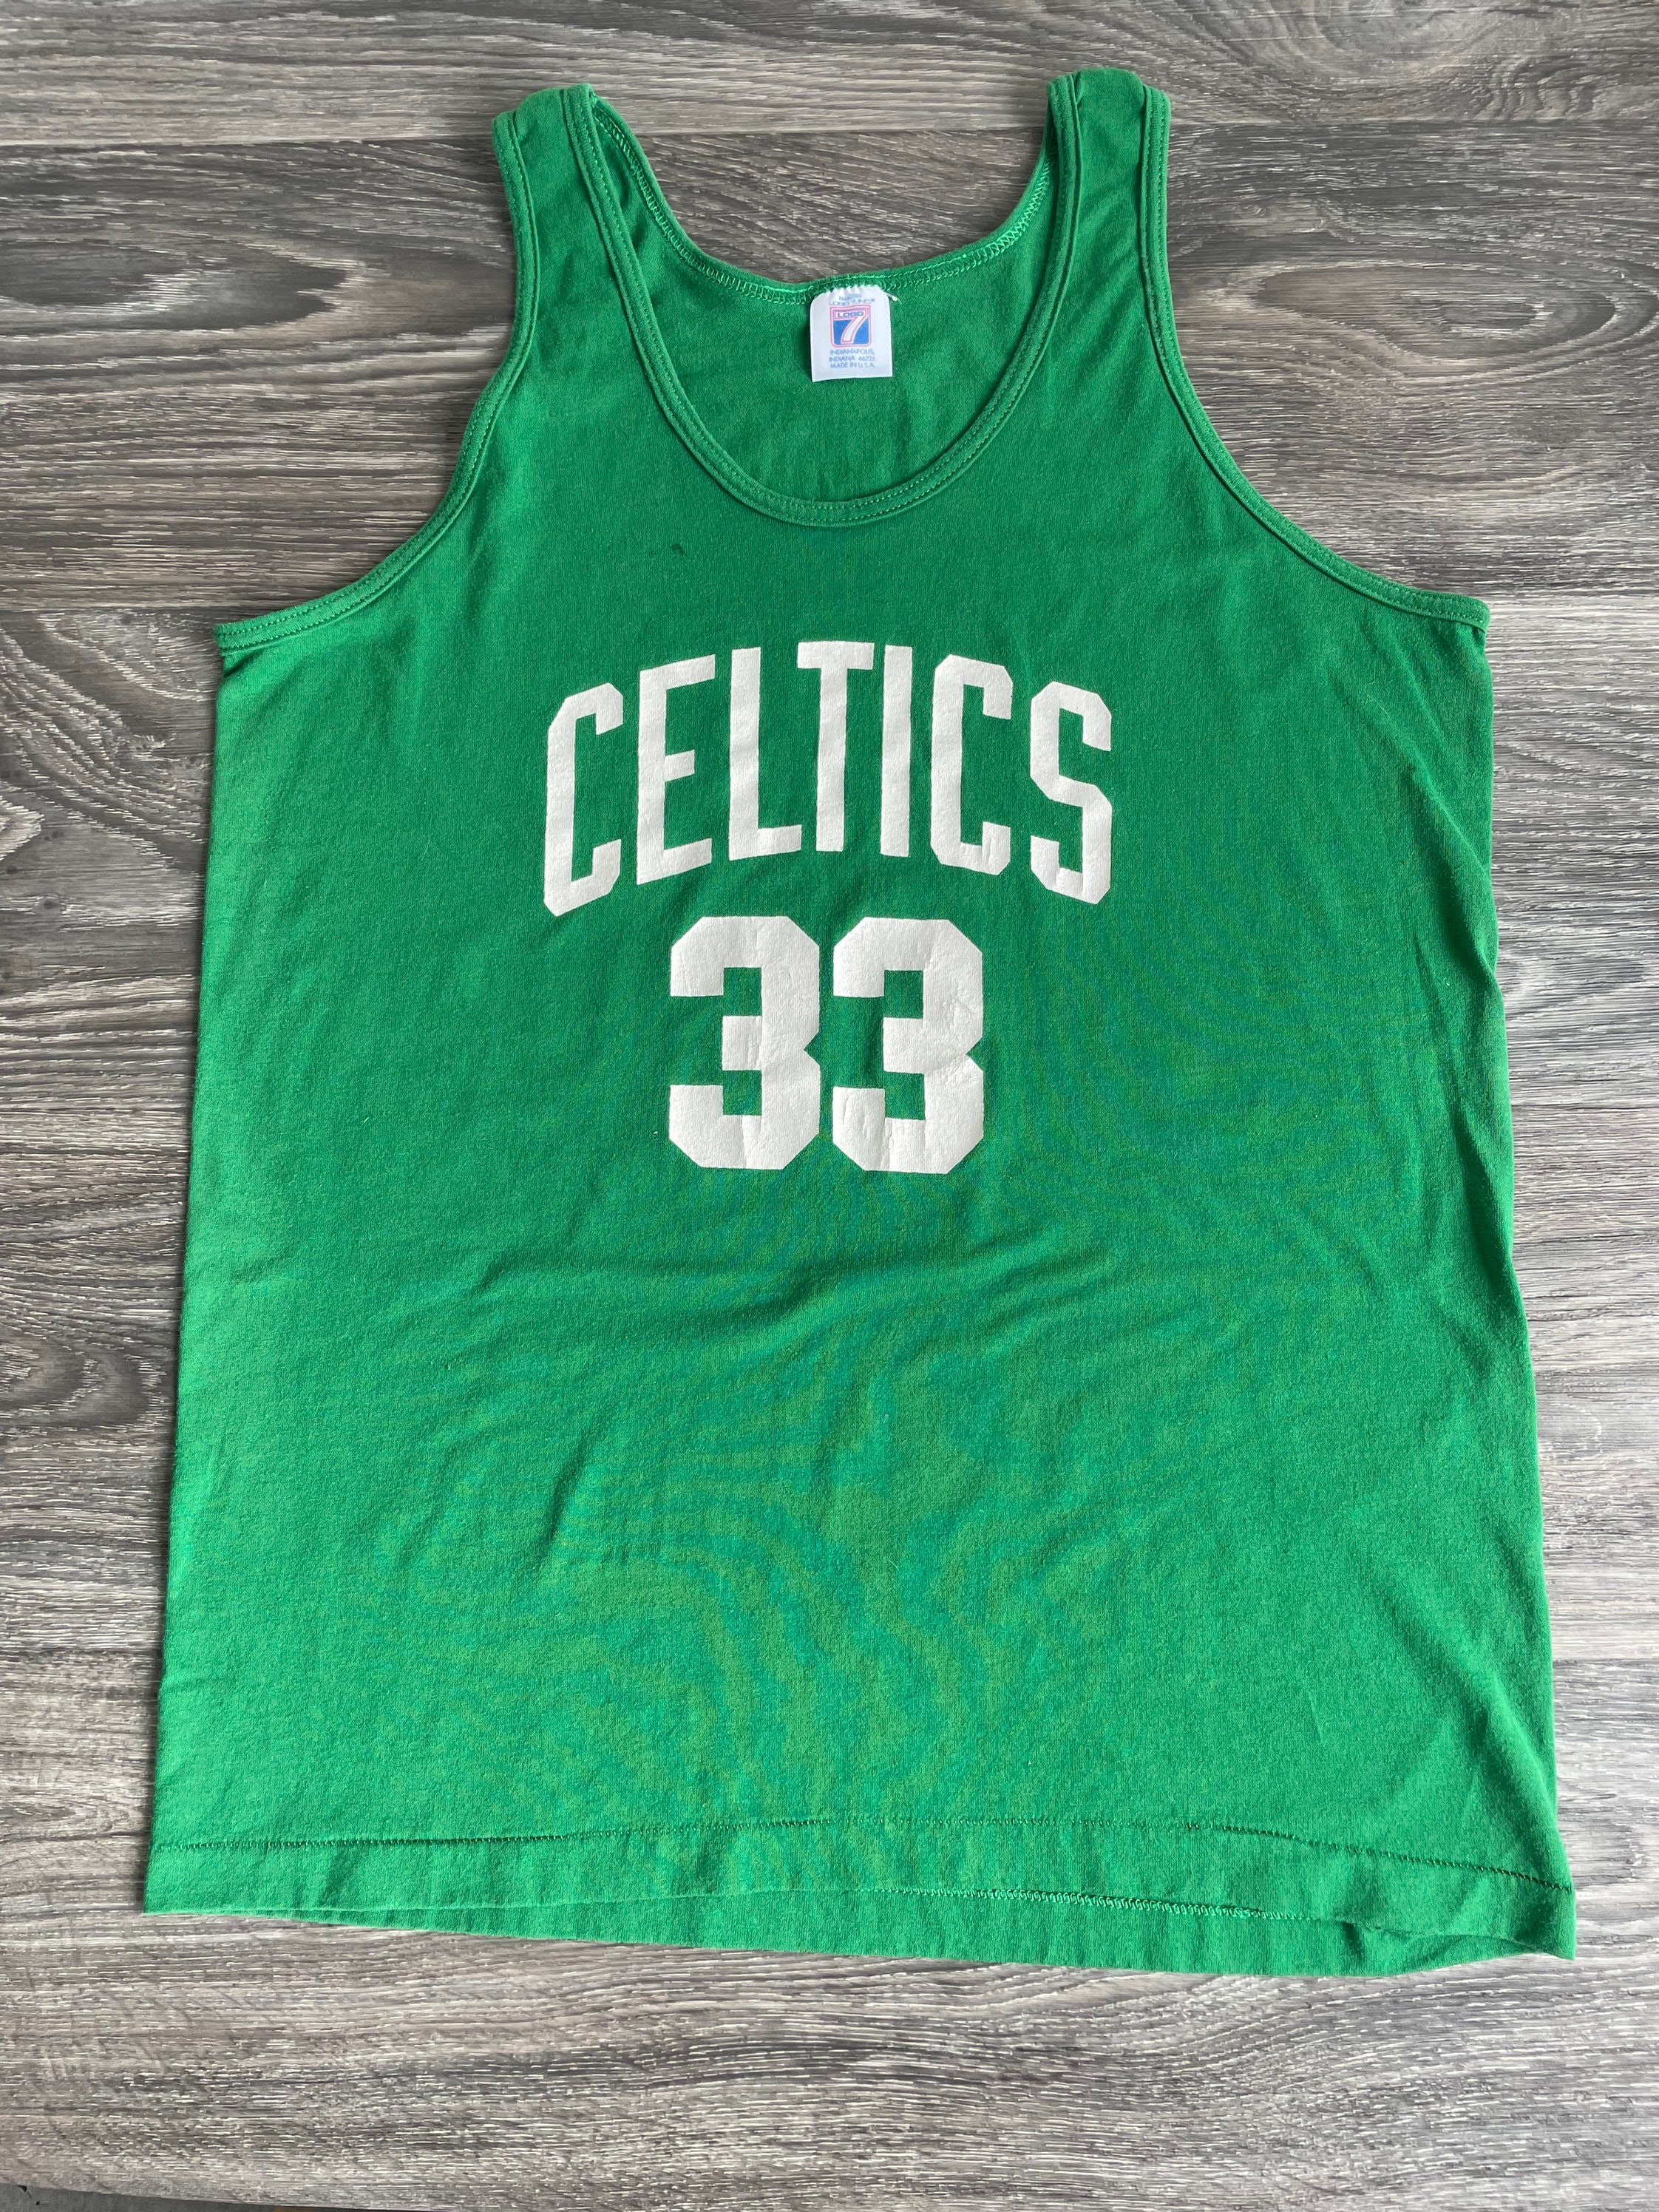 Youth Xl Boston Celtics Larry Bird Jersey for Sale in New York, NY